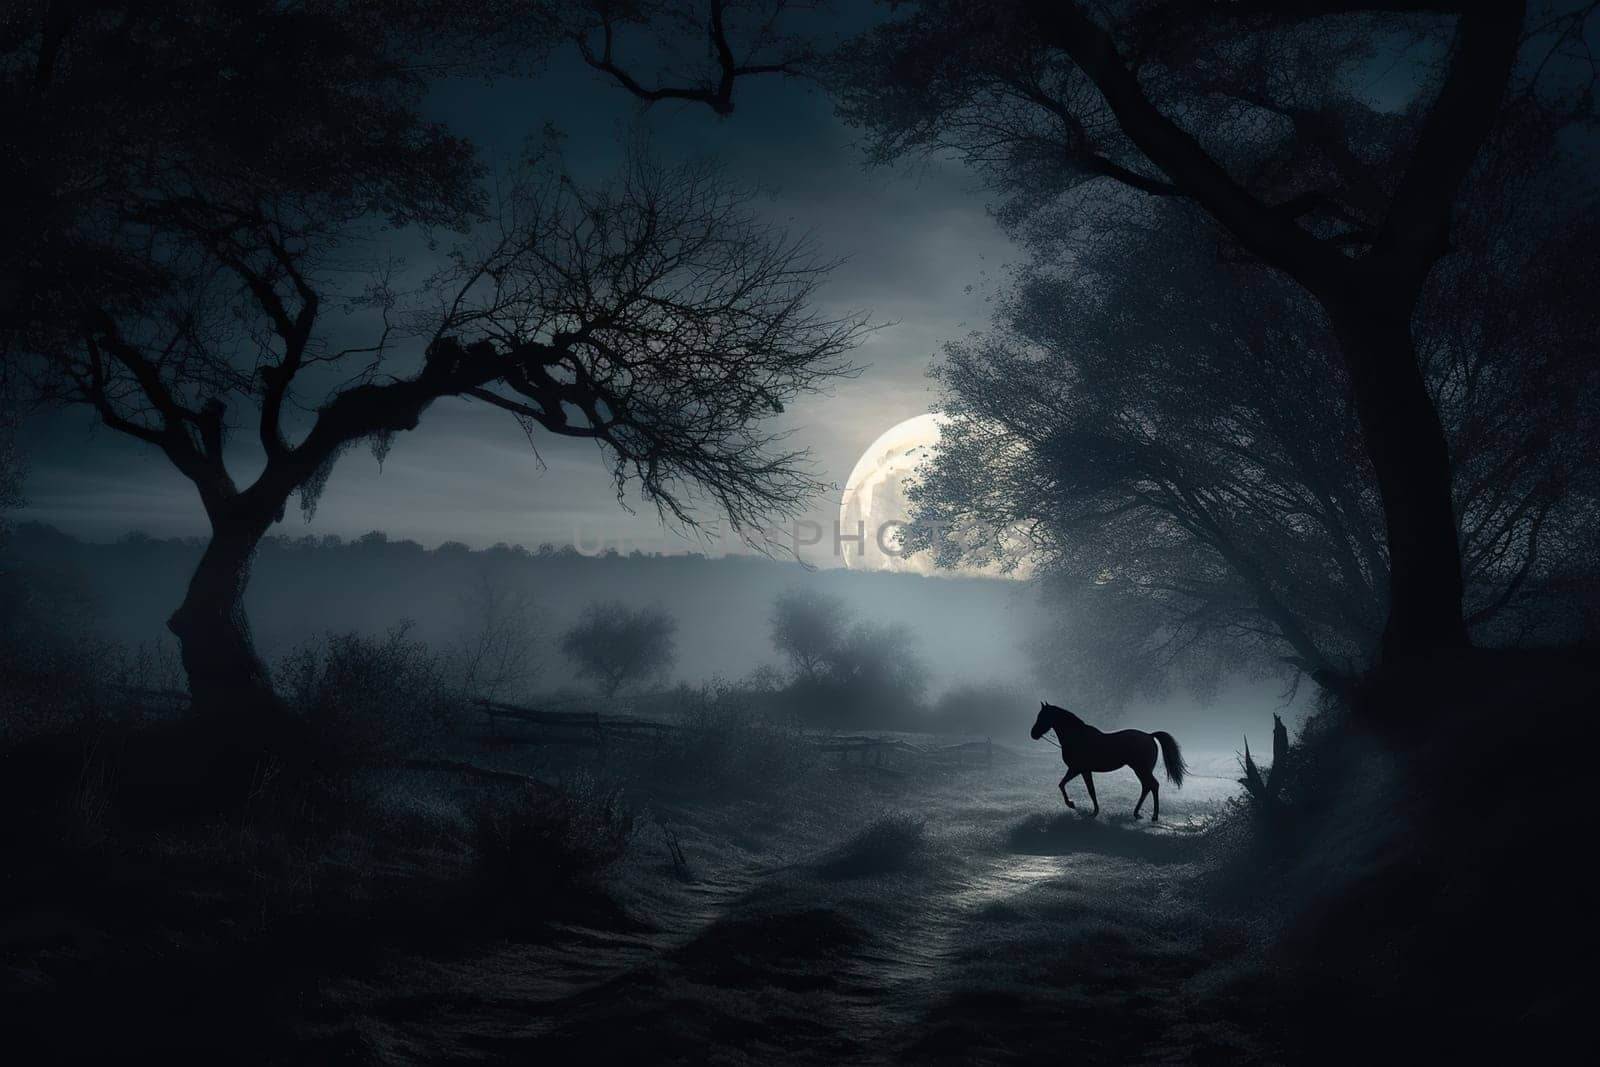 Night Scene With The Horse Cantering Under The Moonlight, Showcasing The Magical And Mysterious Side Of Its Nocturnal Adventures